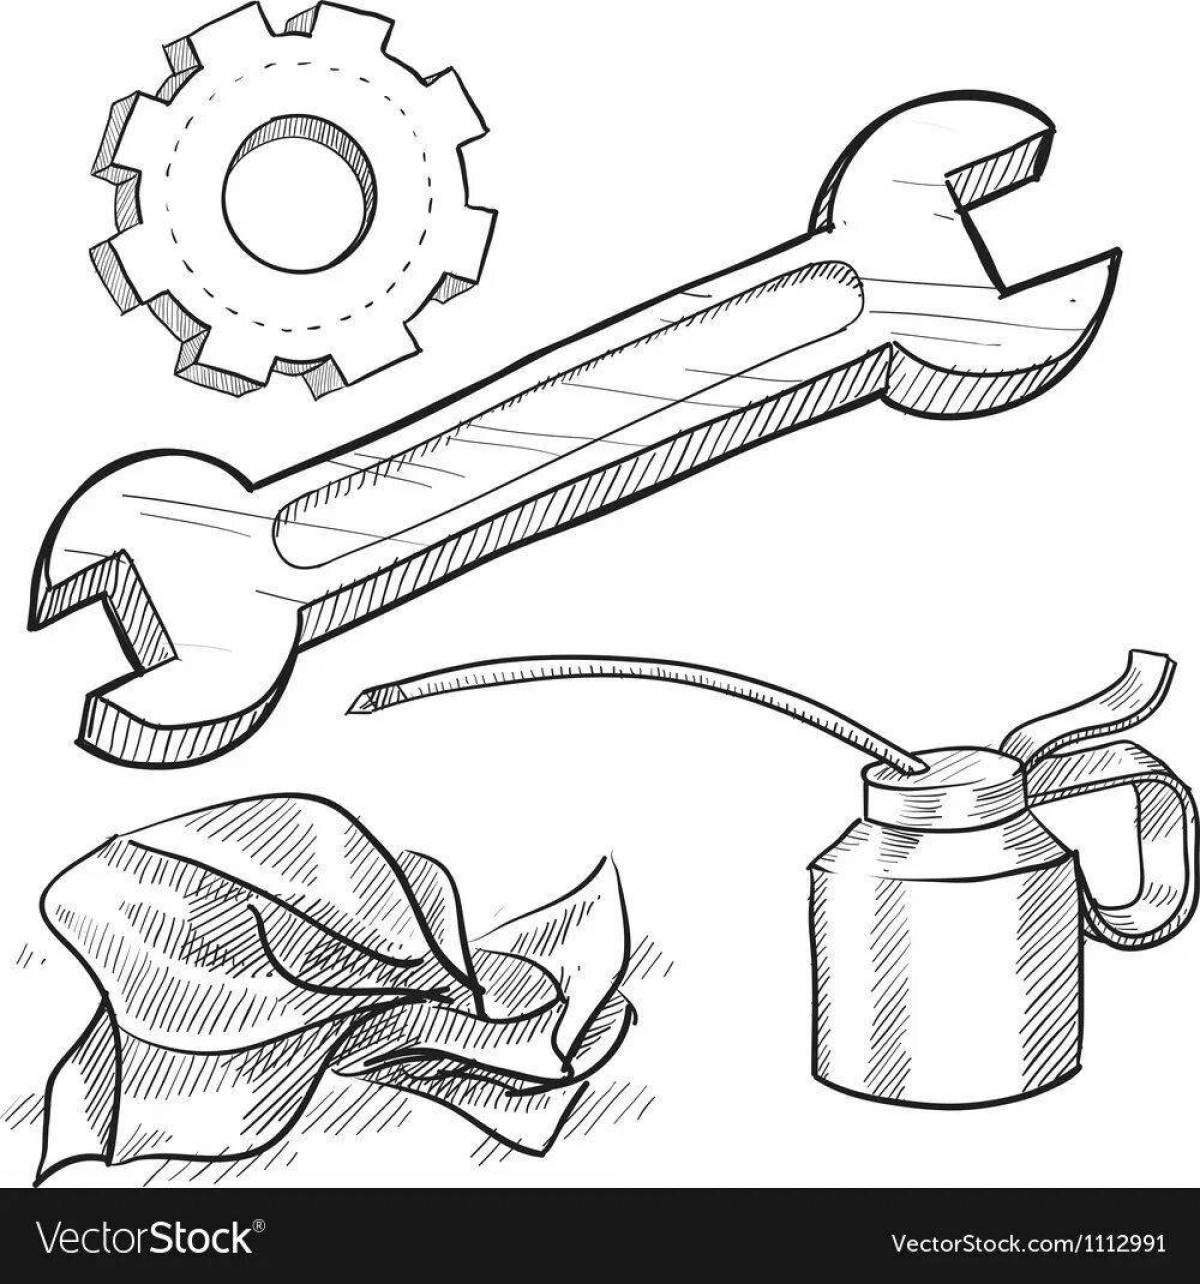 Awesome car mechanic coloring page